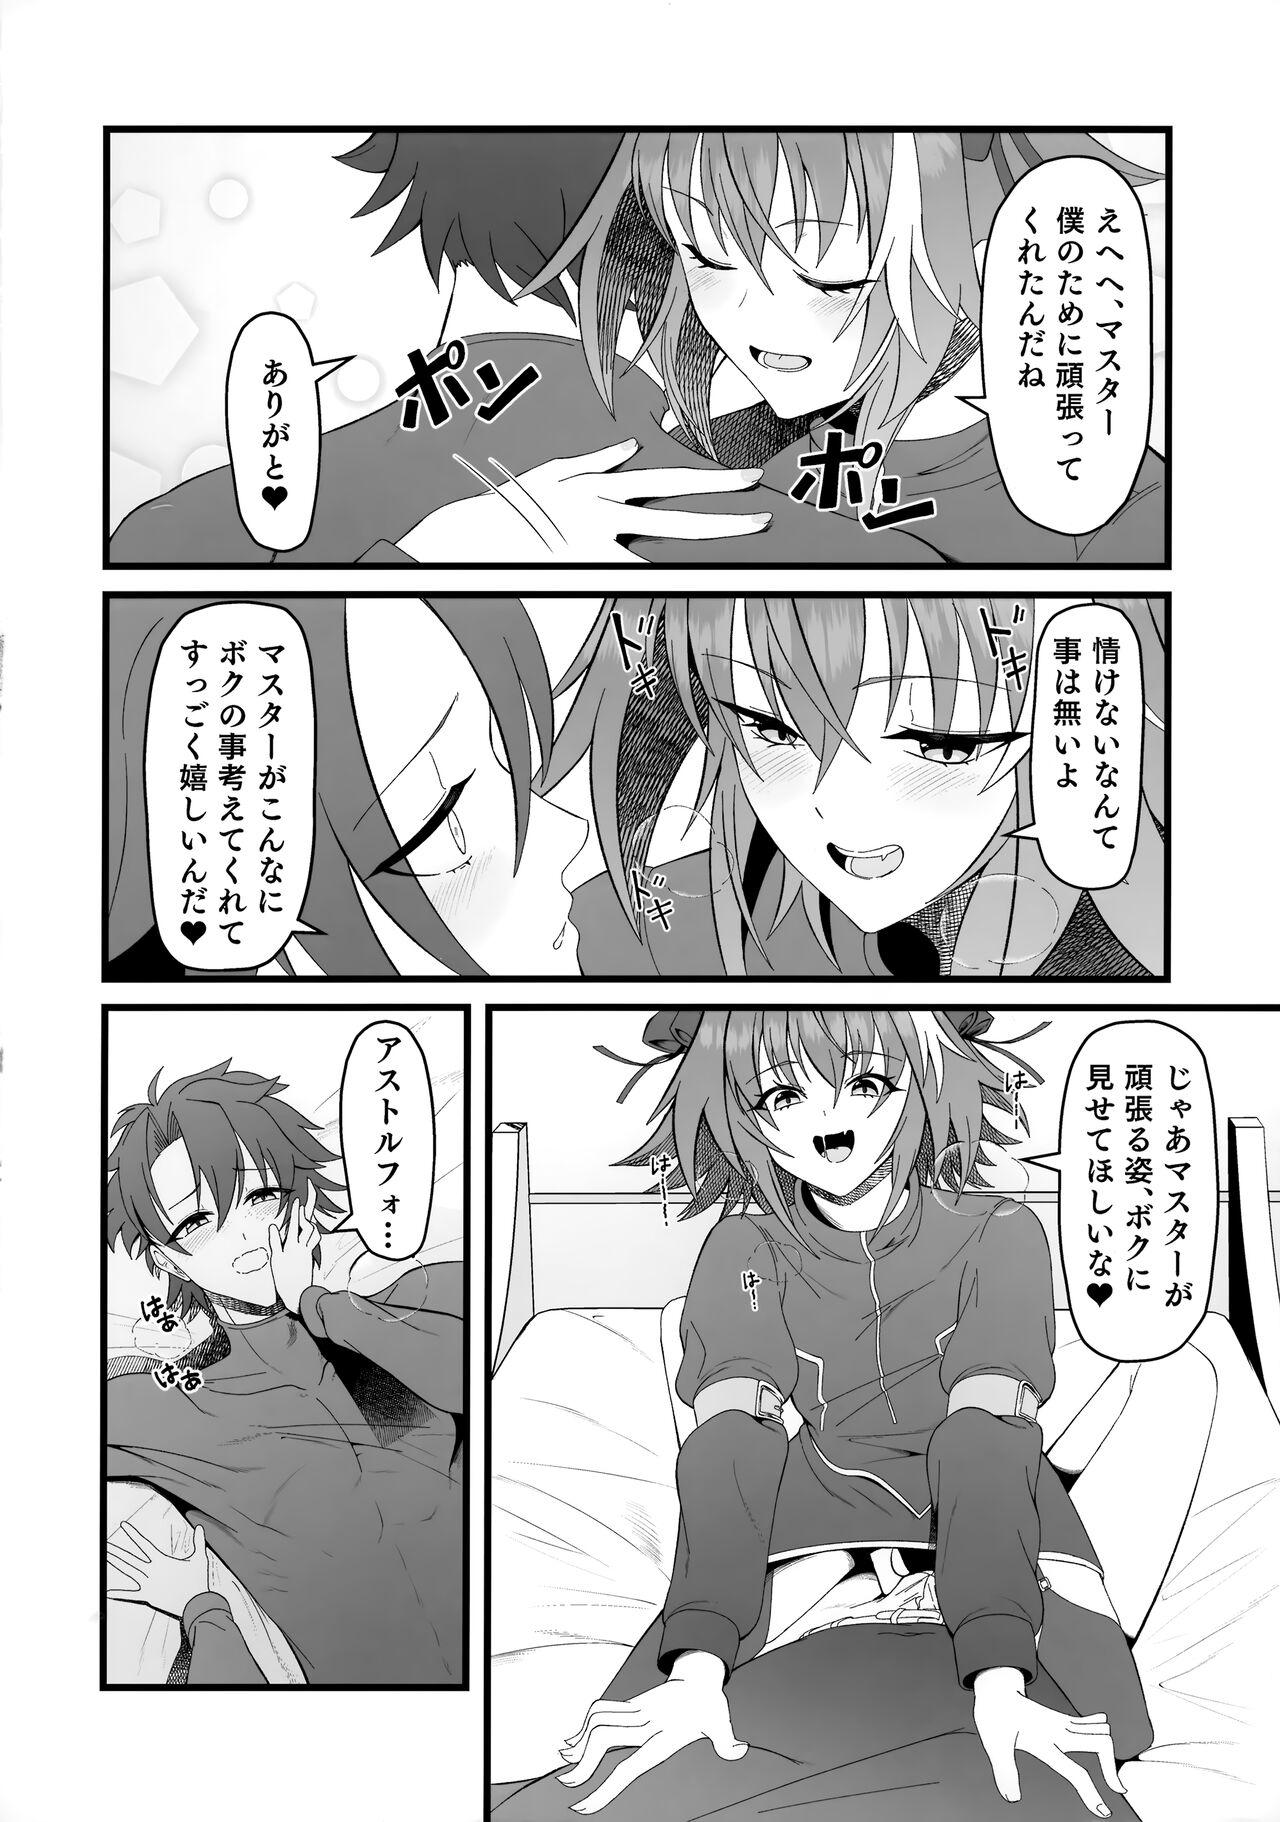 Sperm Kimi no Ichiban ni Naritakute - I wanted to be your number one. - Fate grand order Travesti - Page 9